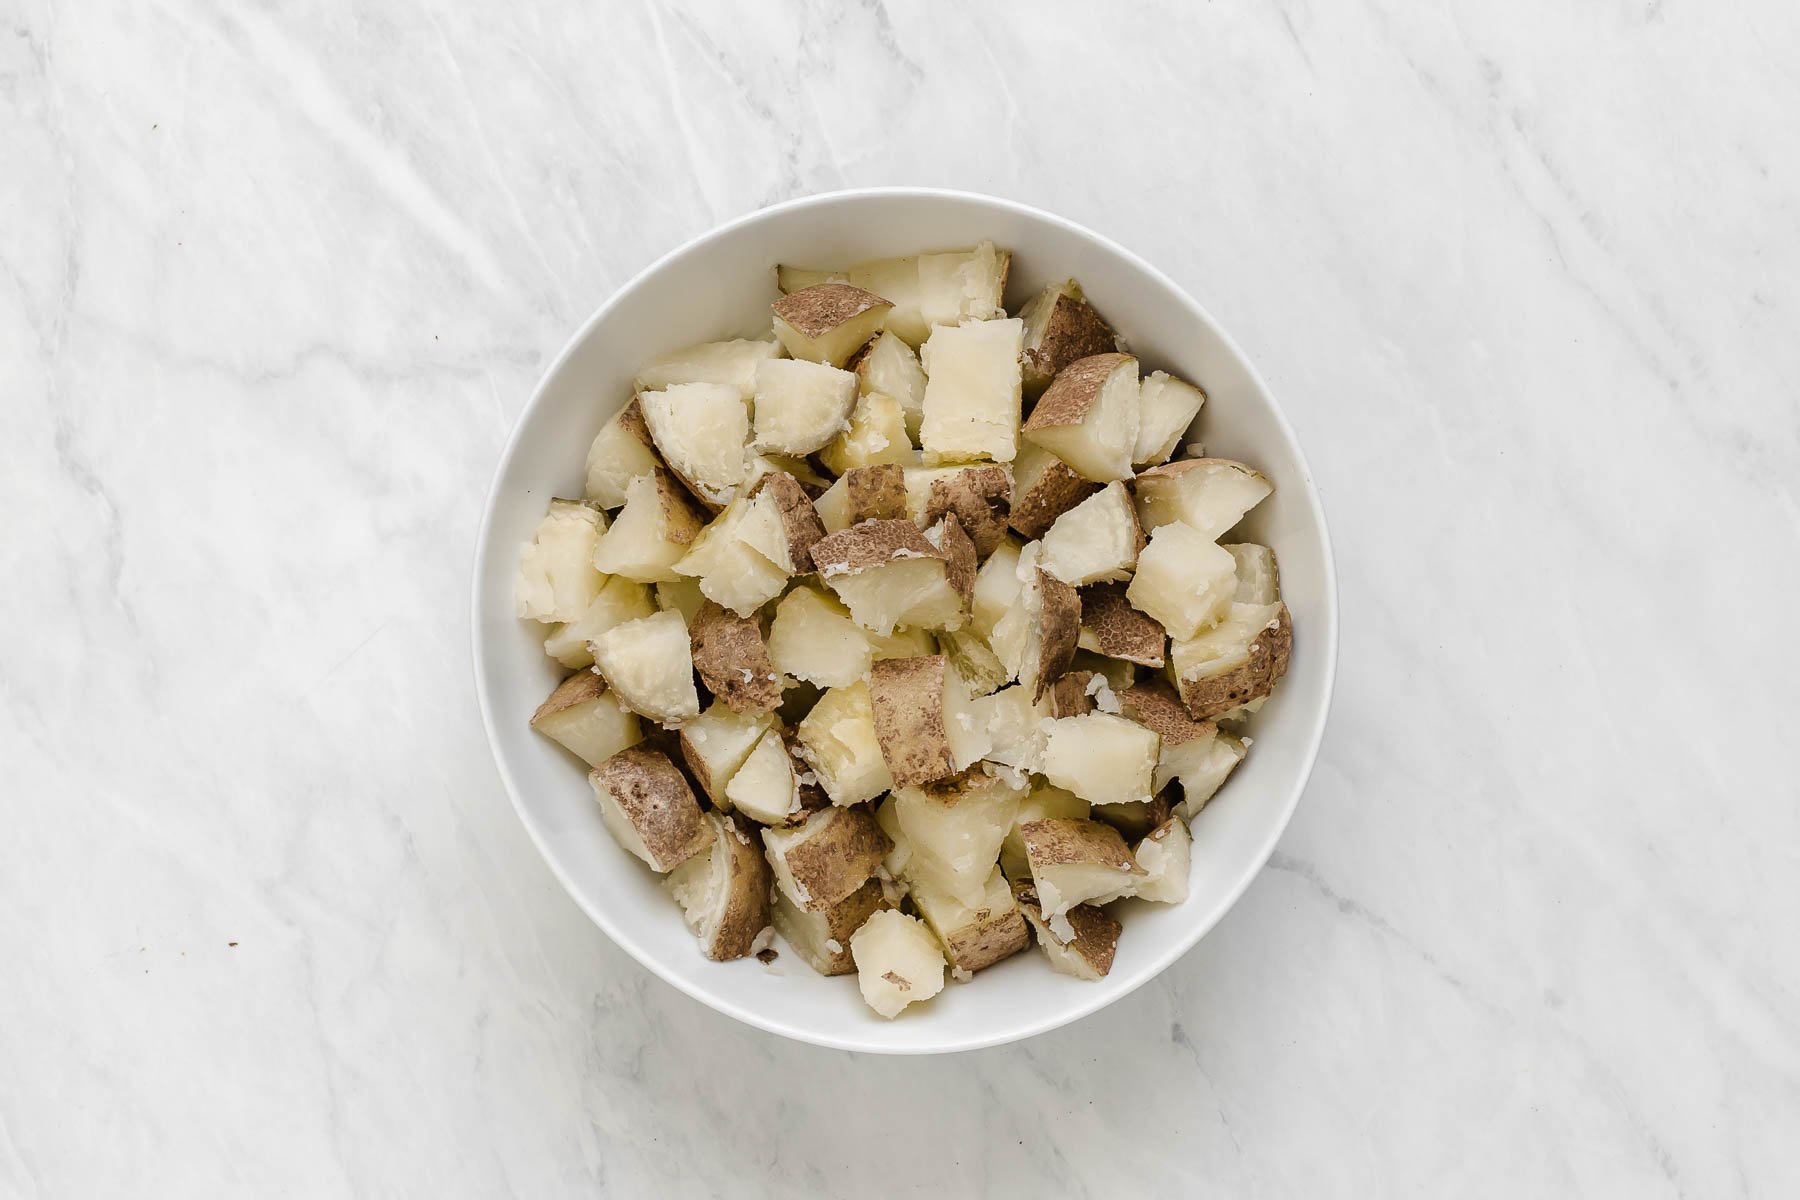 Diced potatoes with the skin on, piled in a small white bowl.